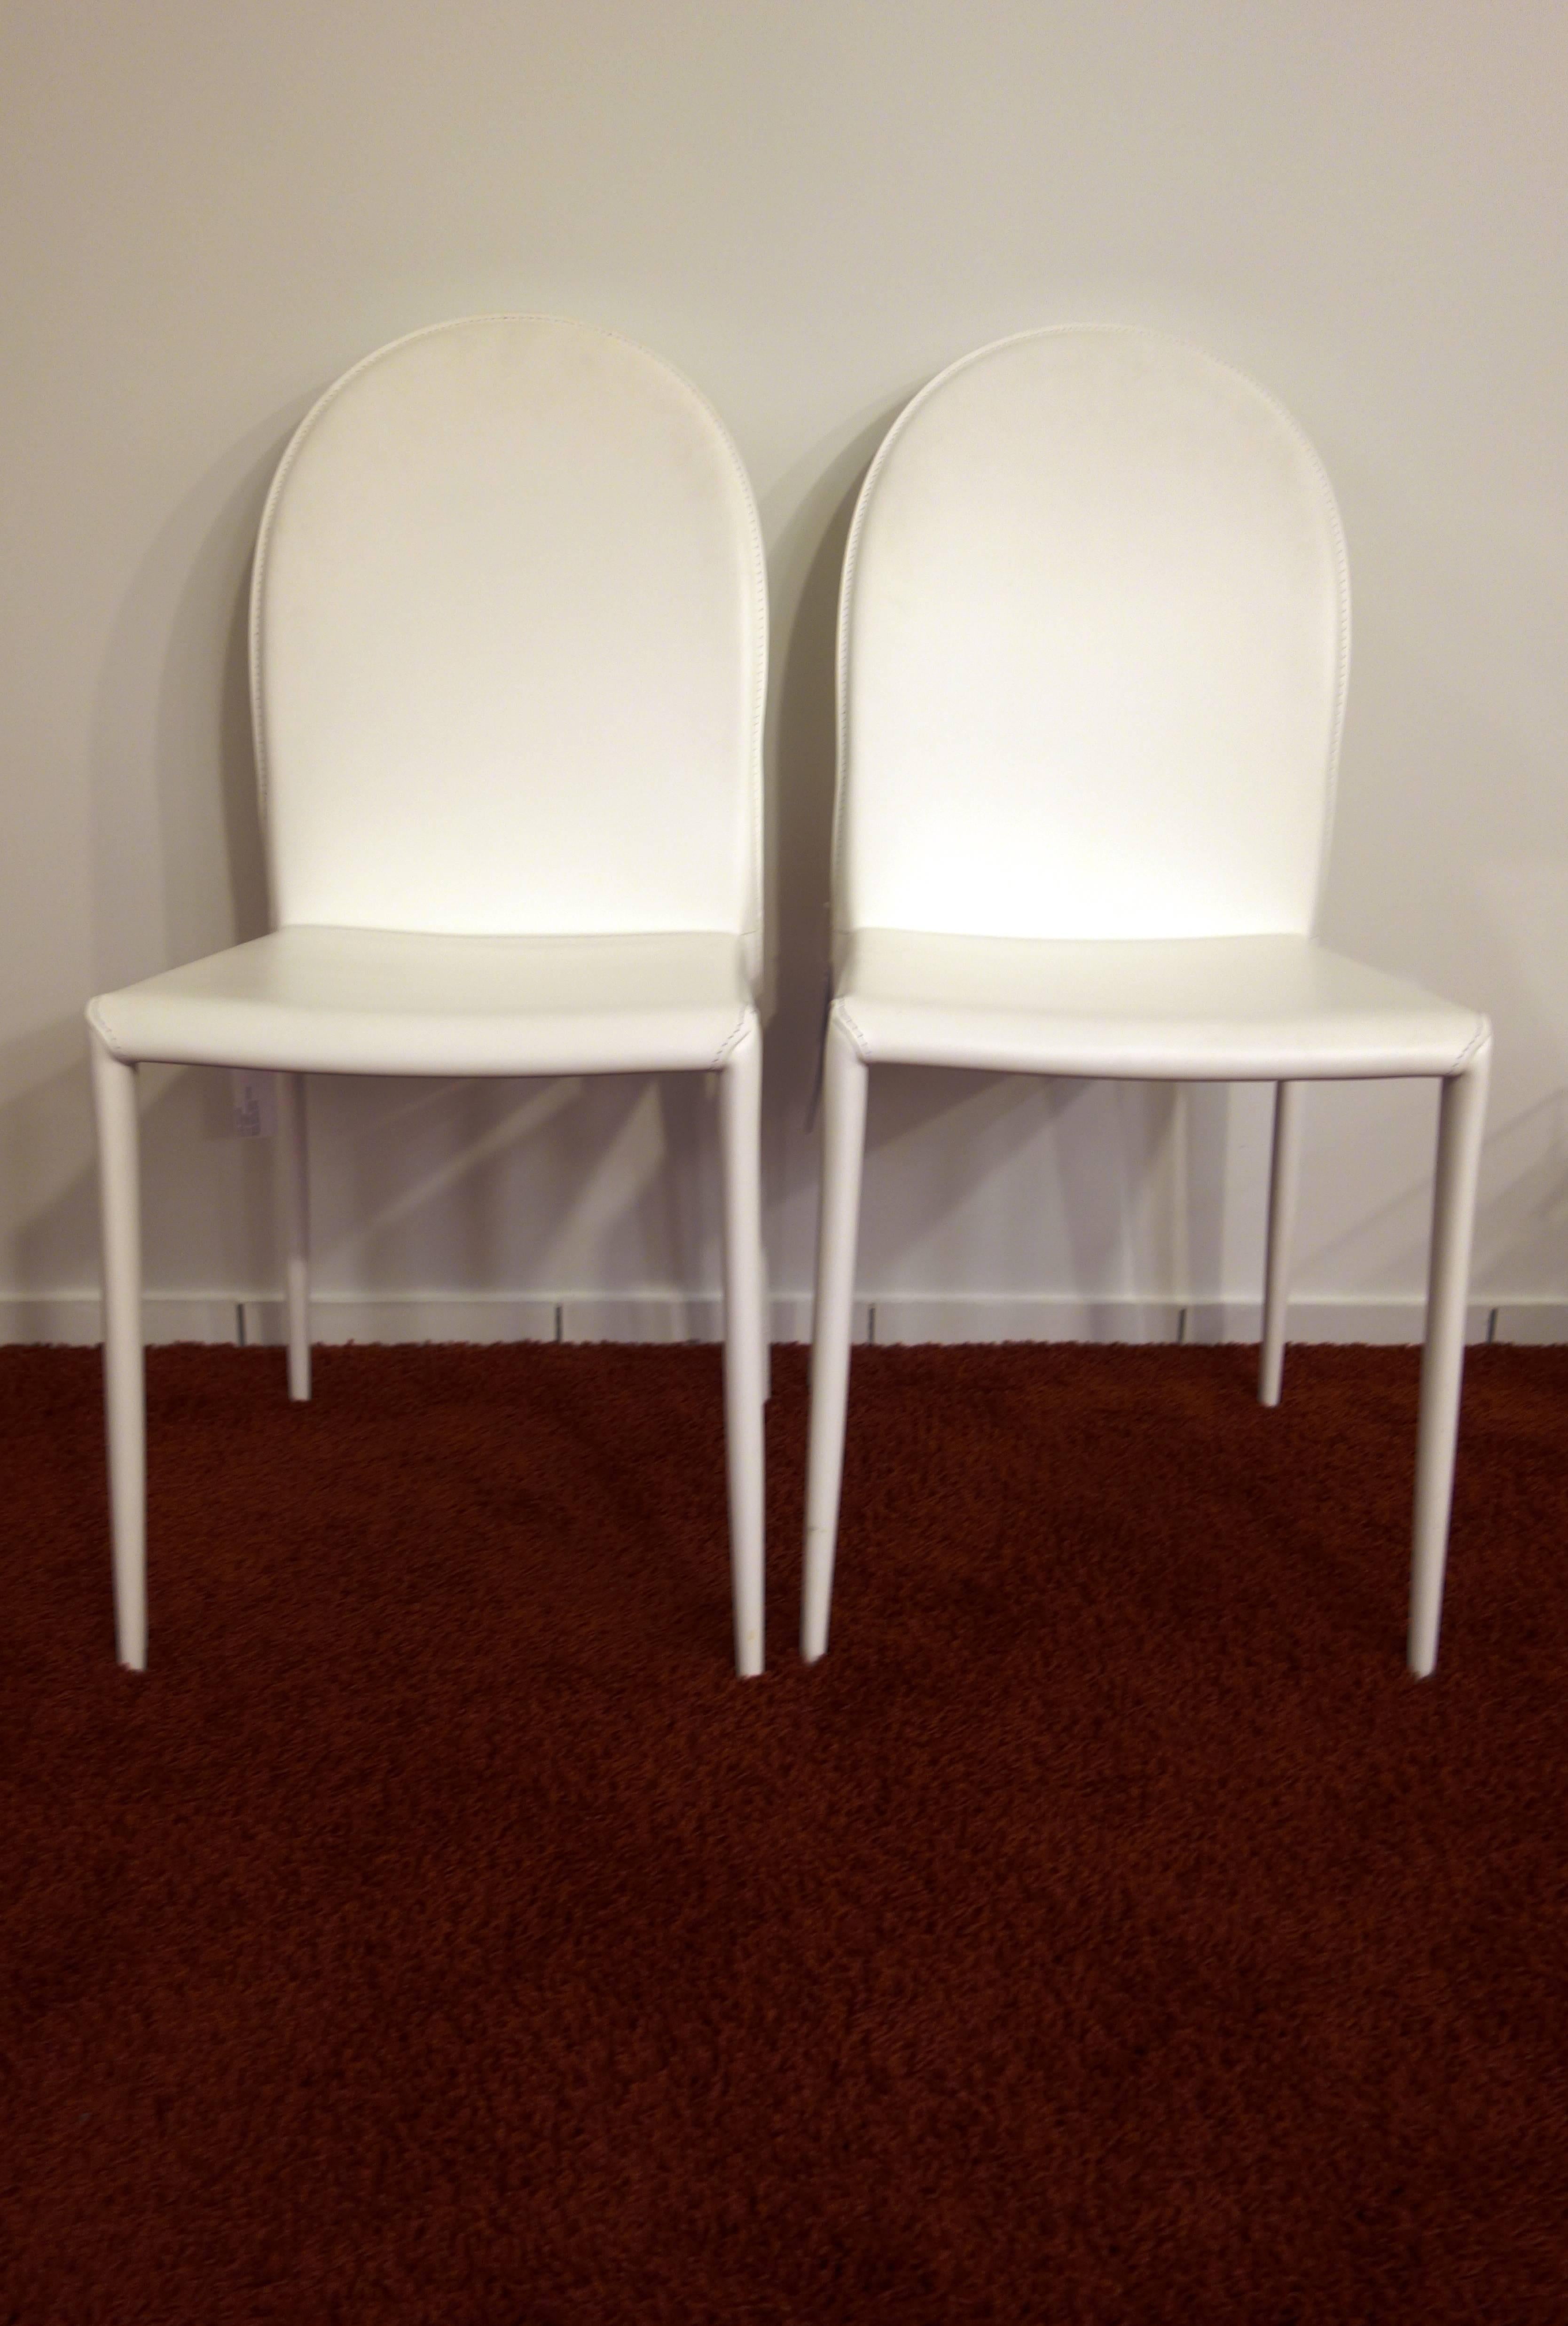 Contemporary 21st Century Dining Table and Stools Vanity by Italian Manufacture Bontempi For Sale